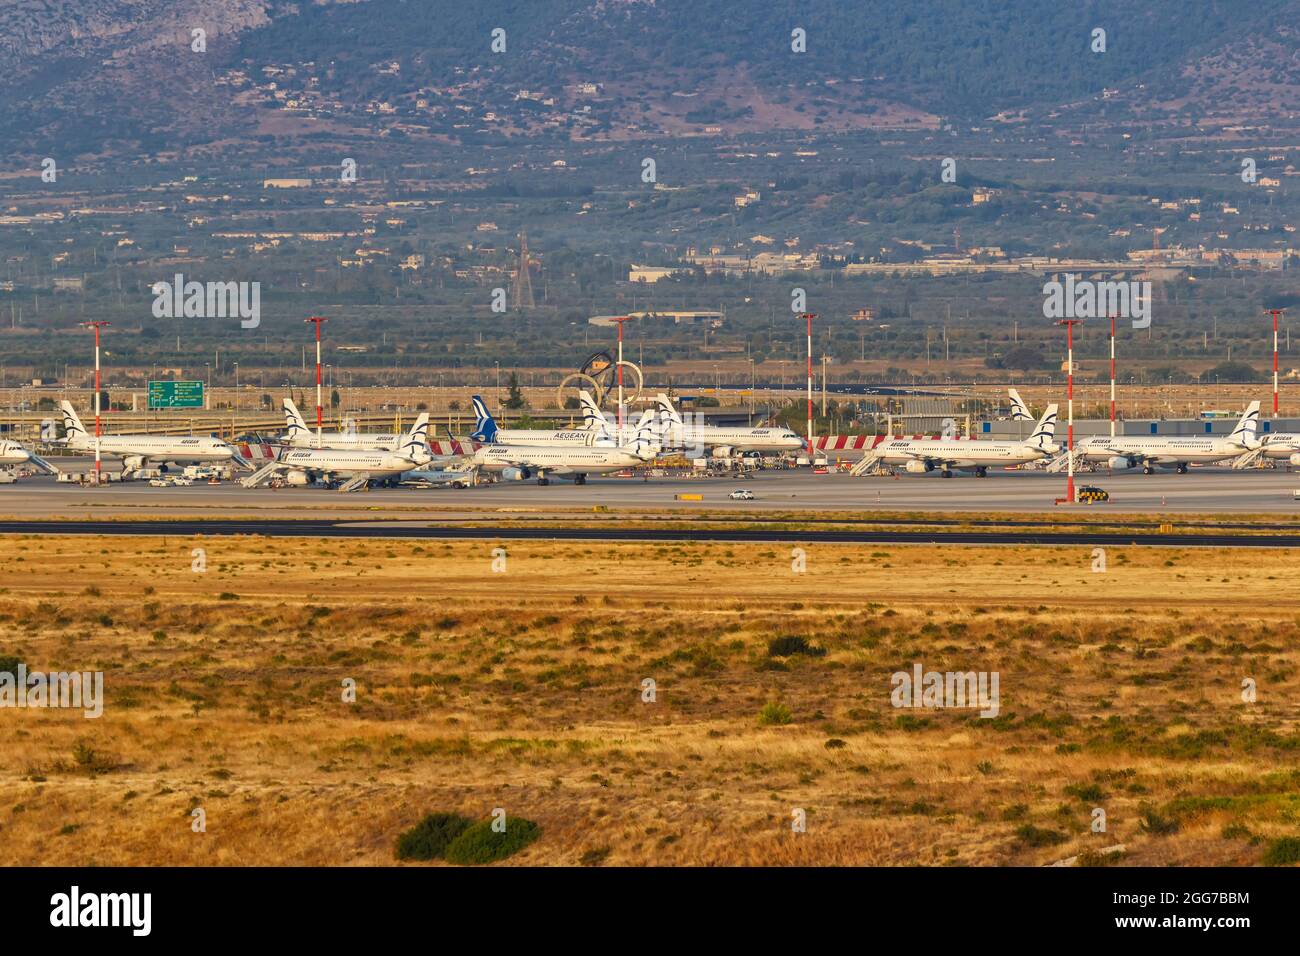 Athens, Greece - September 23, 2020: Aegean Airlines Airbus airplanes at Athens airport (ATH) in Greece. Stock Photo